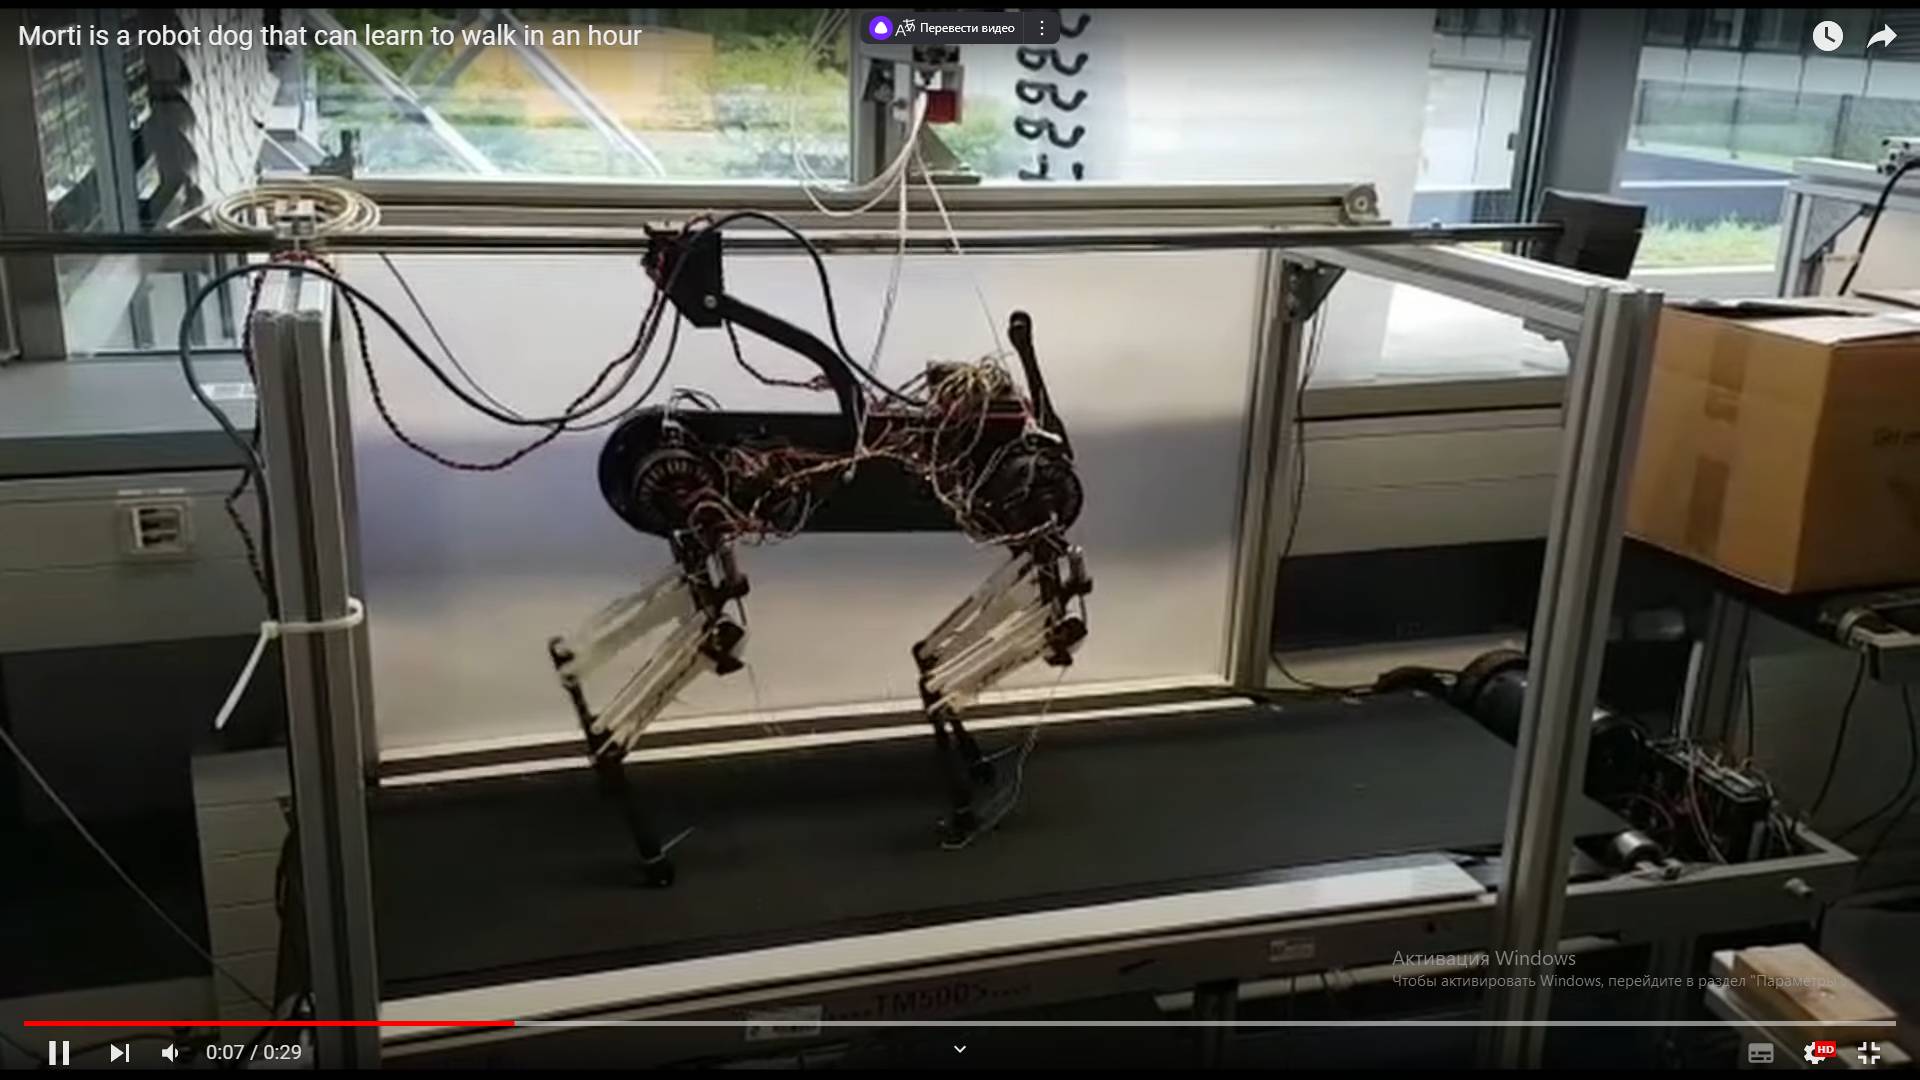 Цитата из: Morti is a robot dog that can learn to walk in an hour. Dezeen 2022.